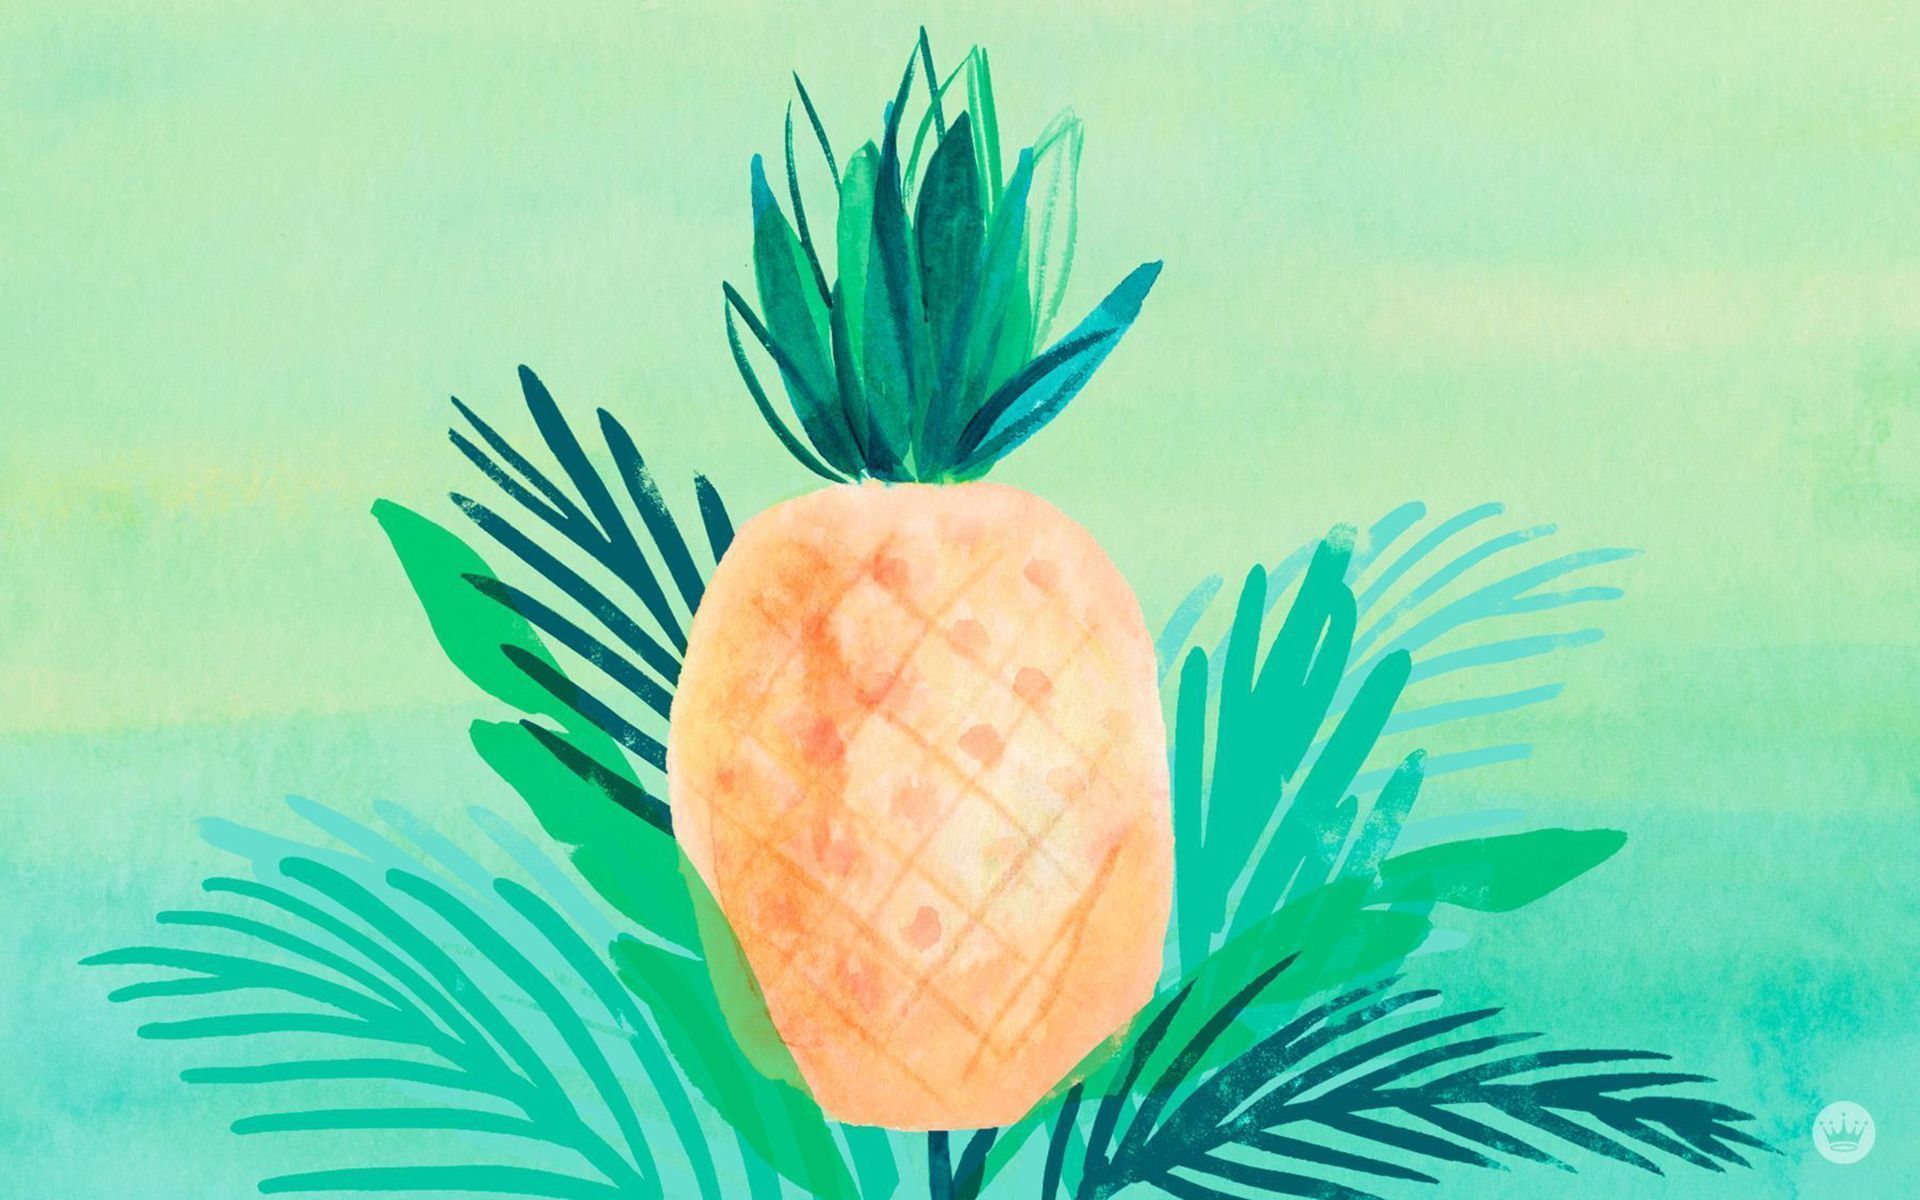 Aesthetic Pineapple Wallpaper for PC Free Download